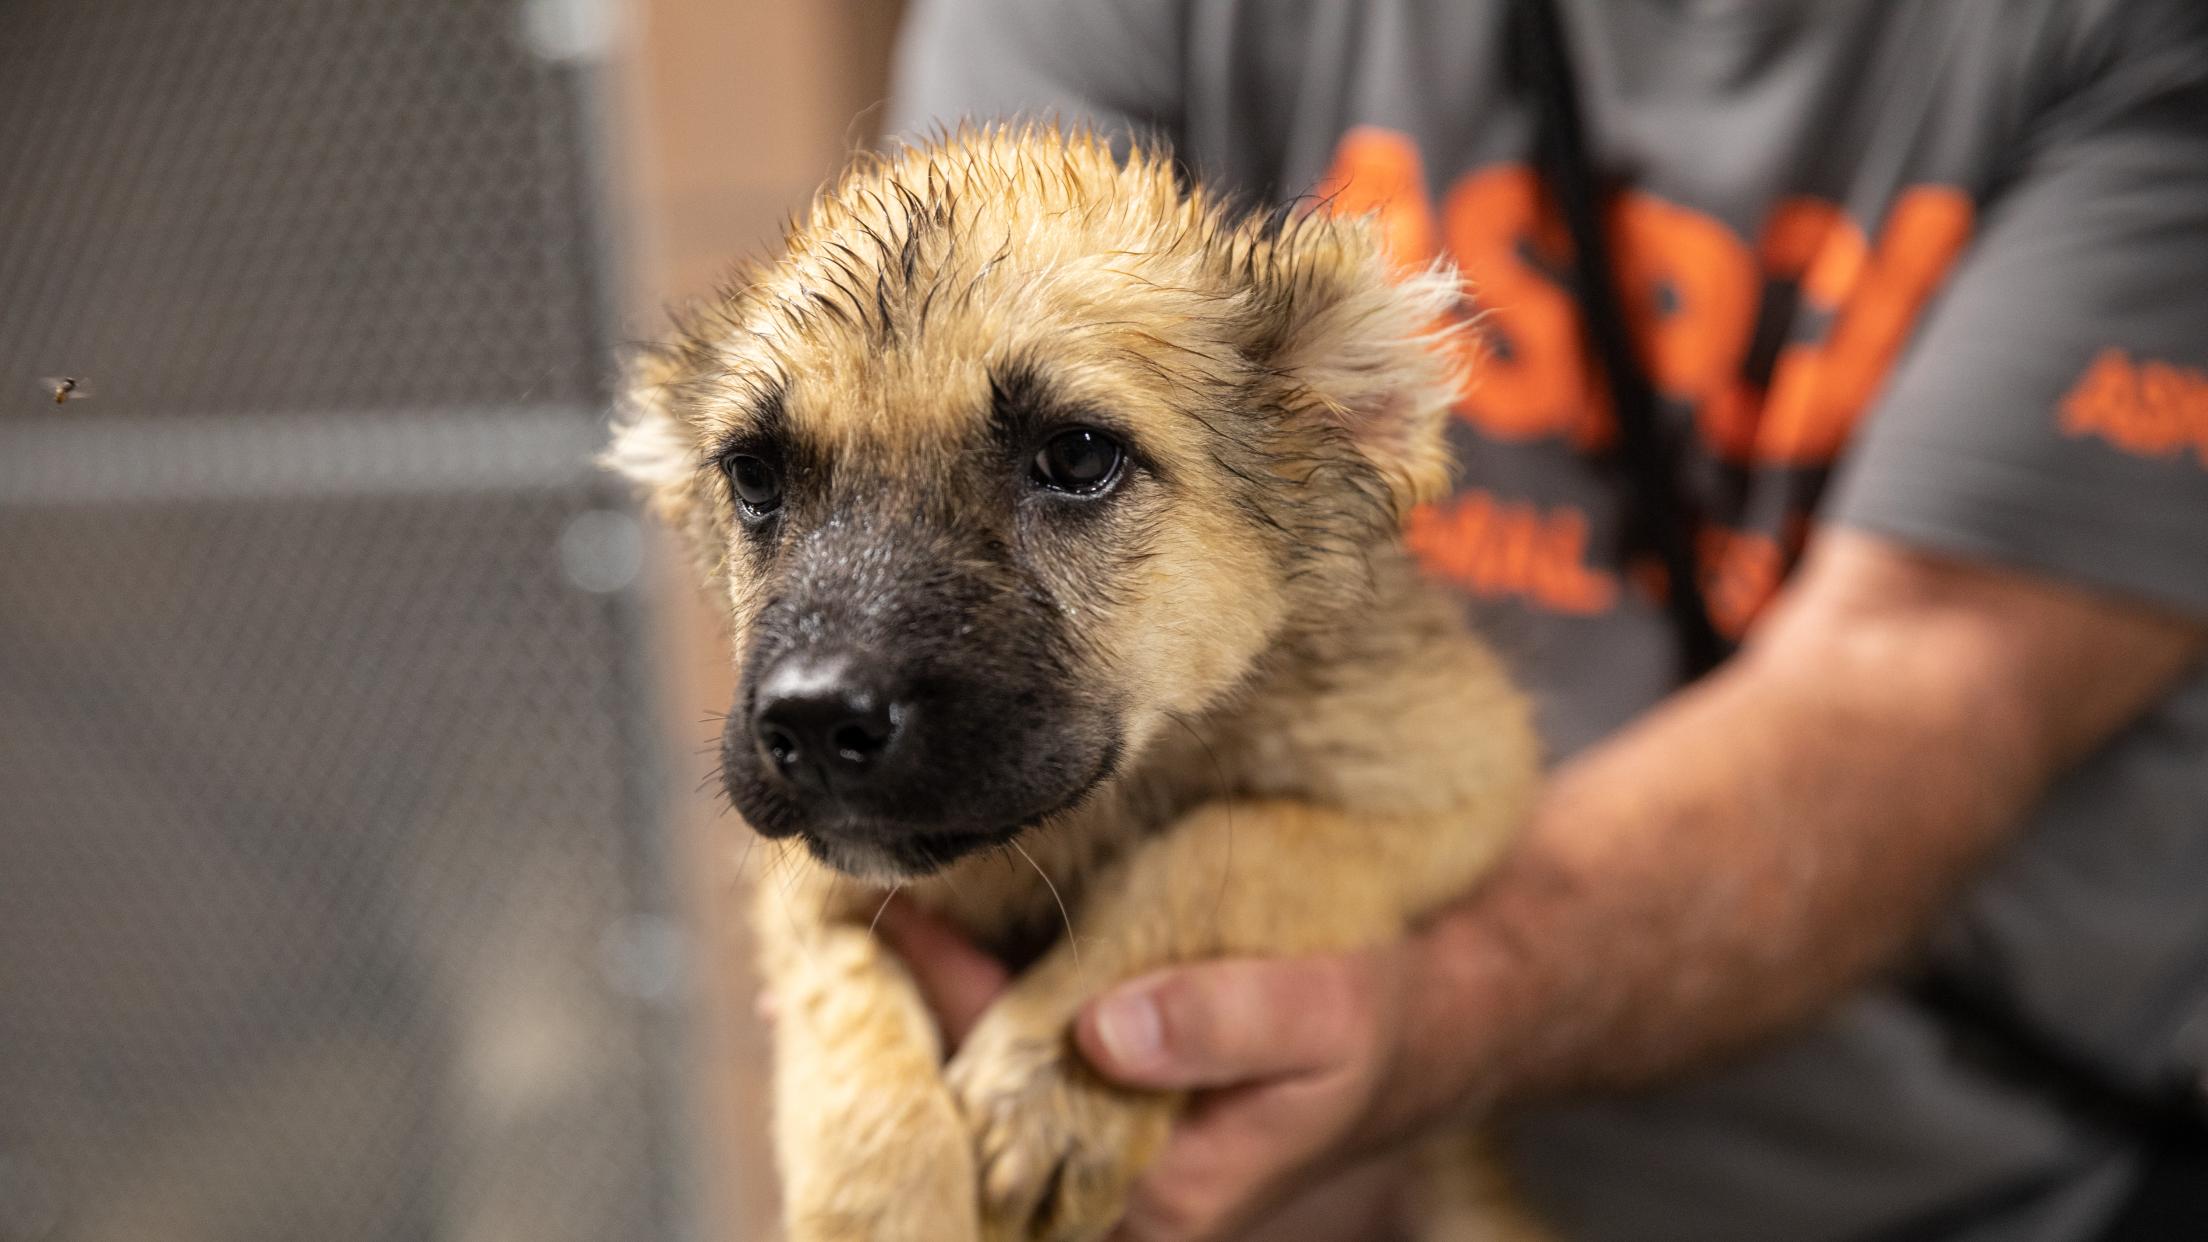 ASPCA rescues nearly 300 animals with help from FedEx | FedEx Cares